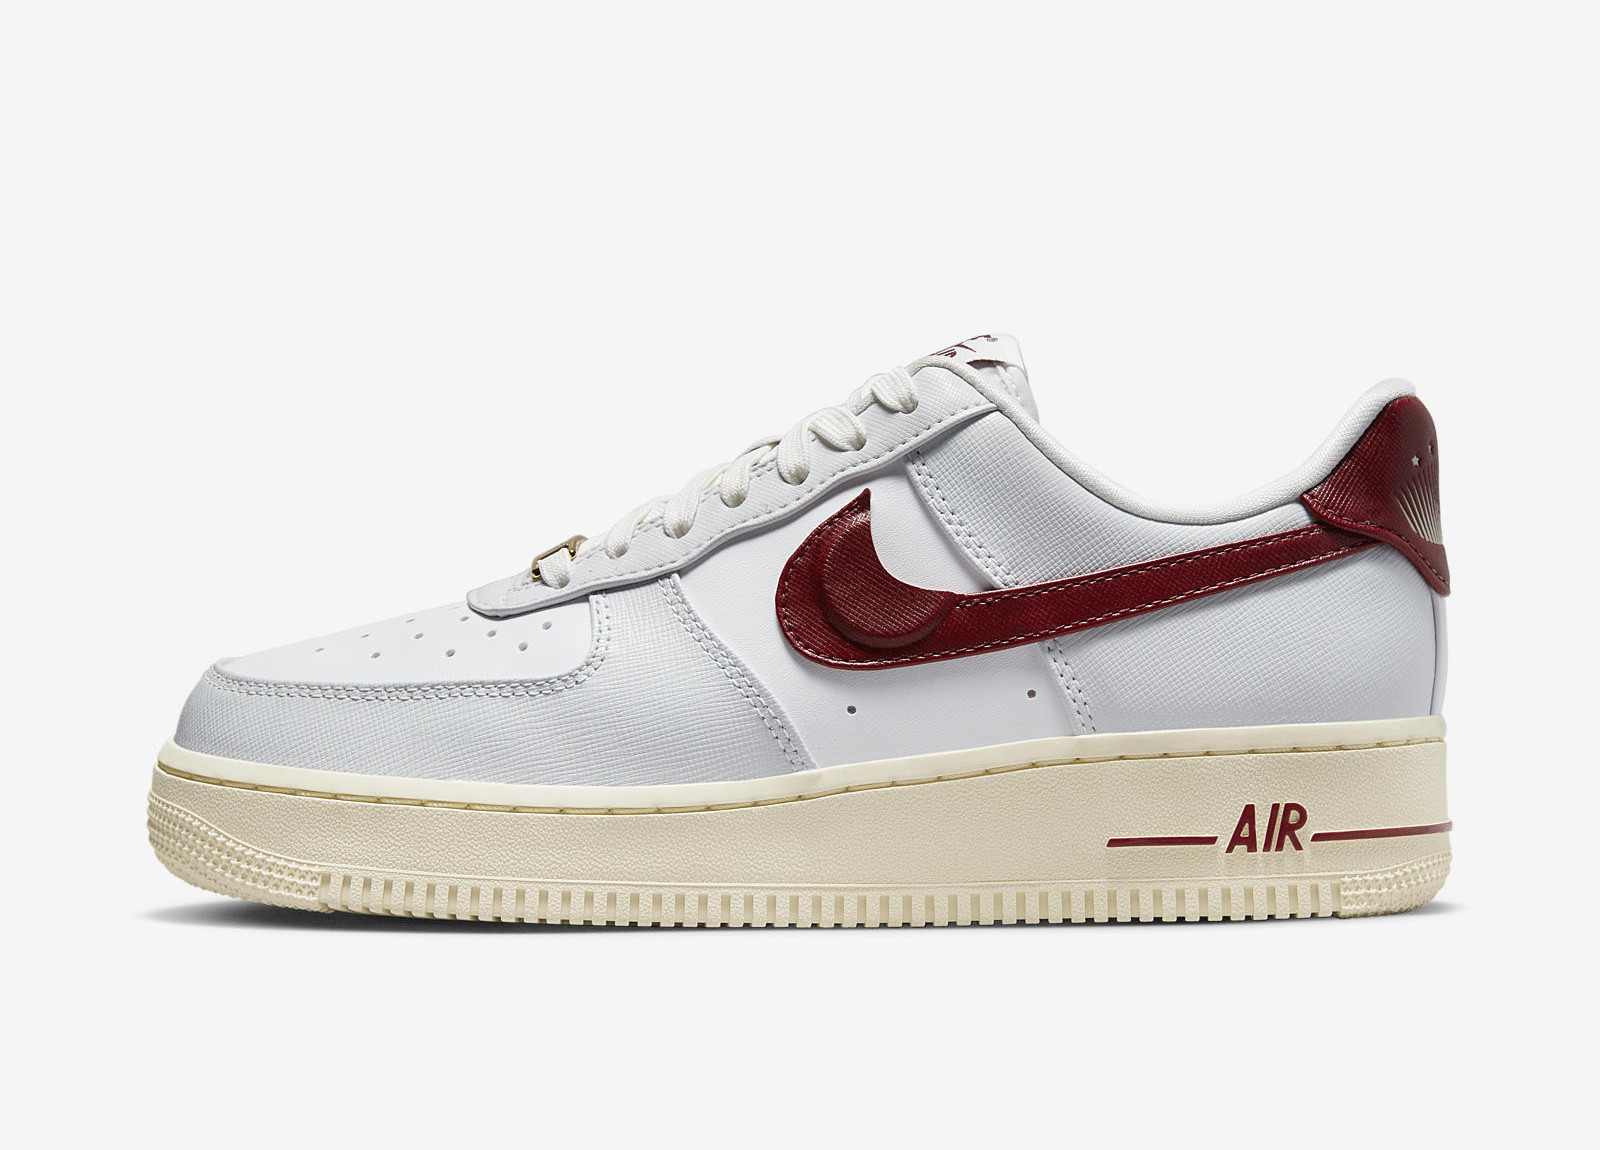 Nike Air Force 1 Low
« Just Do It »